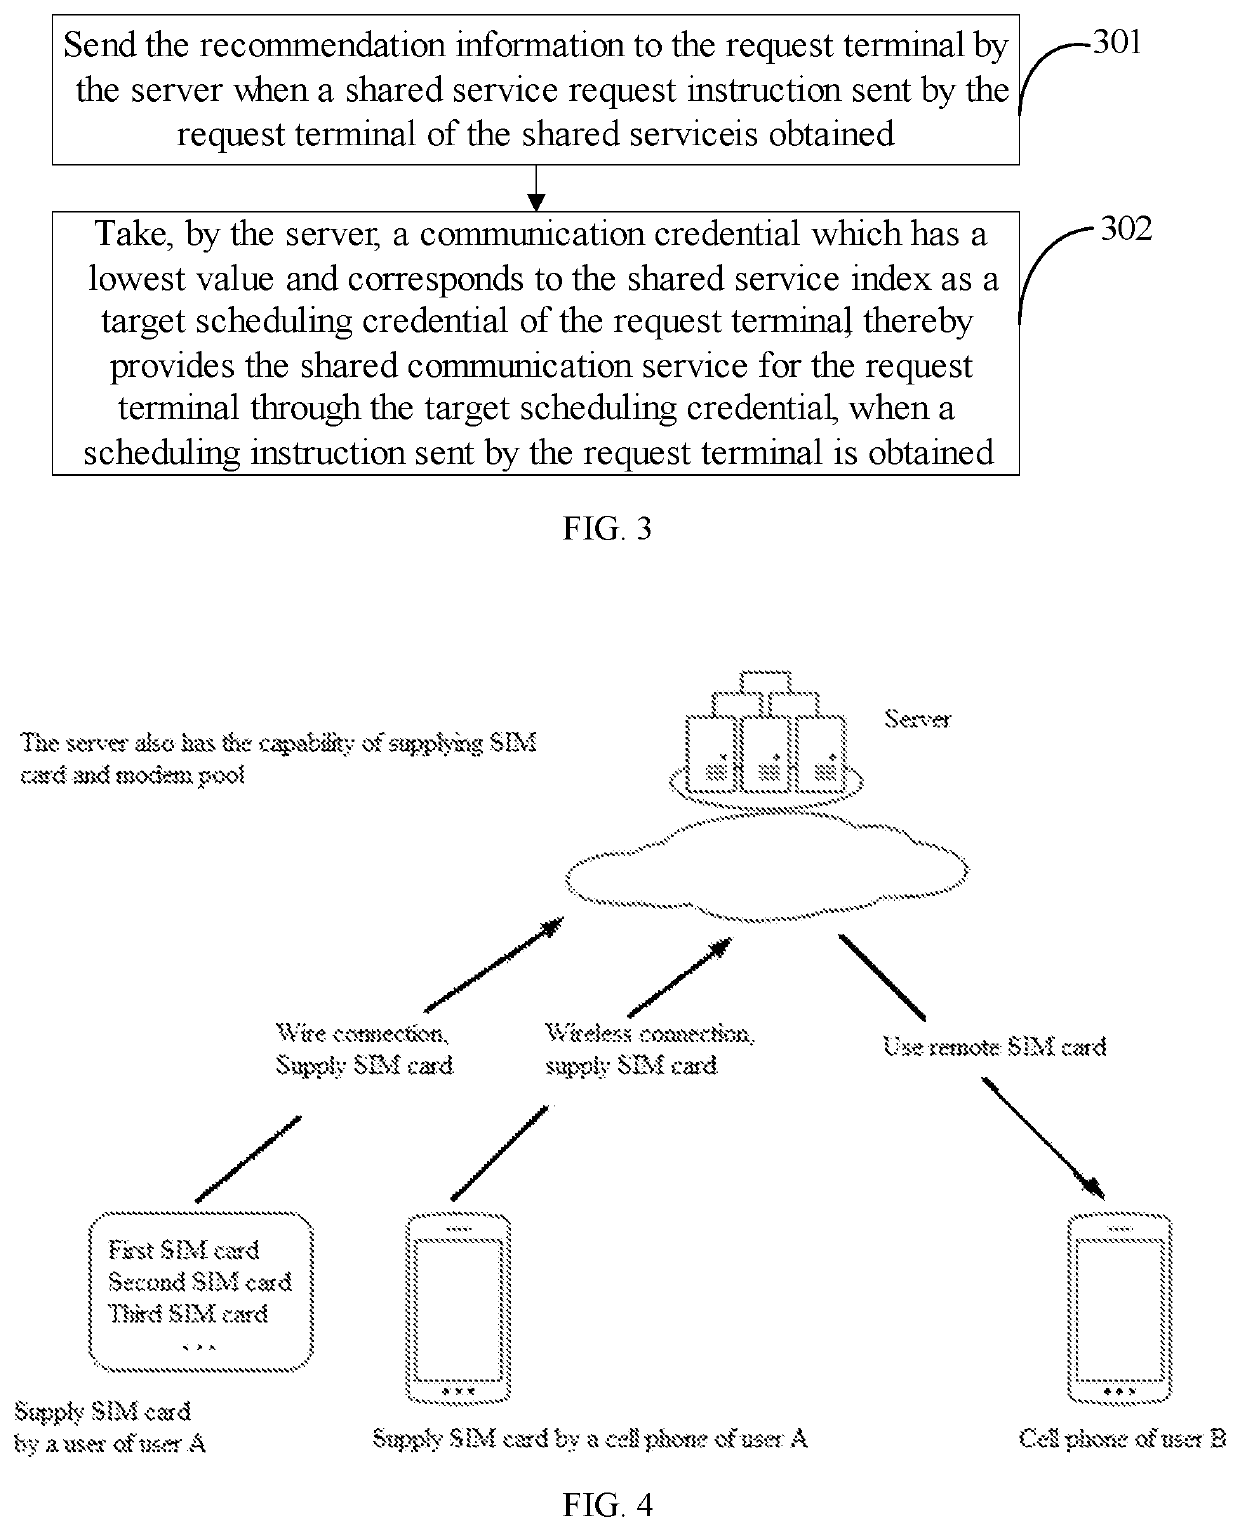 Method of determining shared service index based on shared service of communication credential